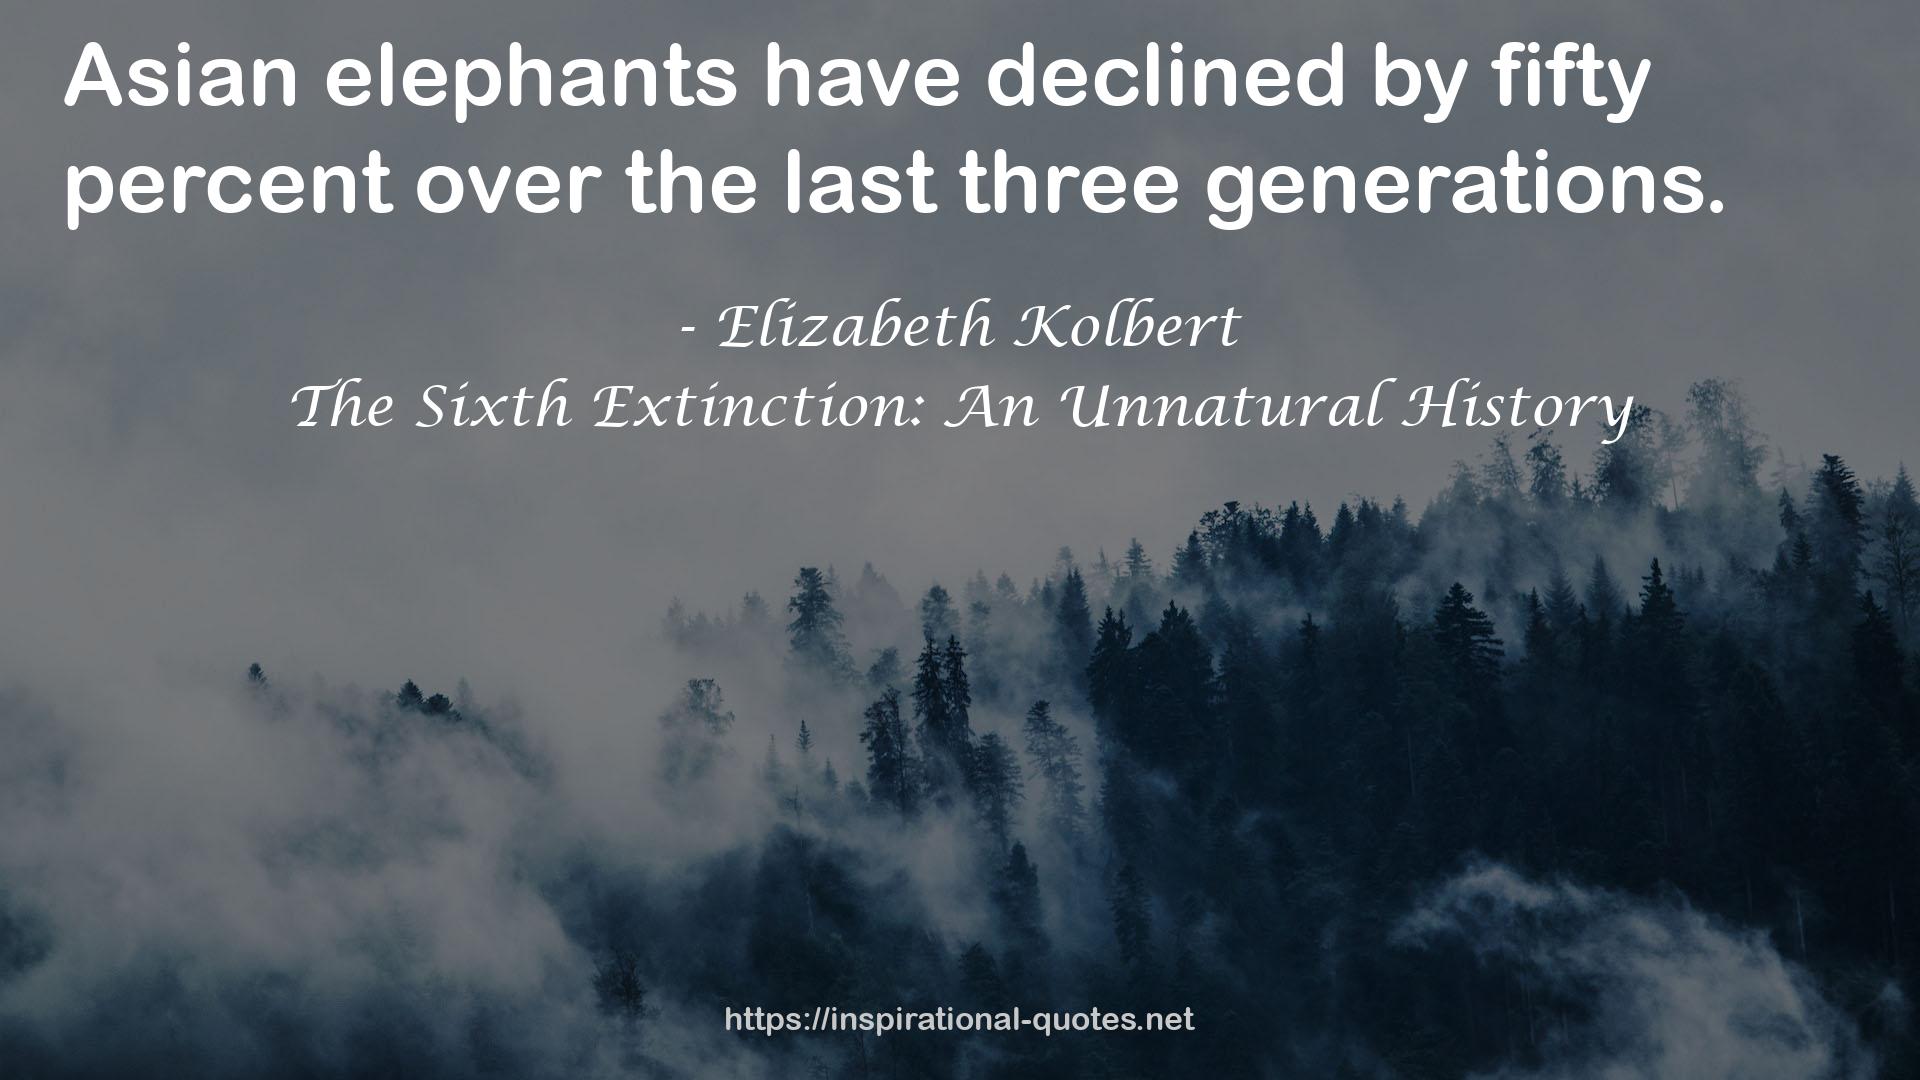 The Sixth Extinction: An Unnatural History QUOTES